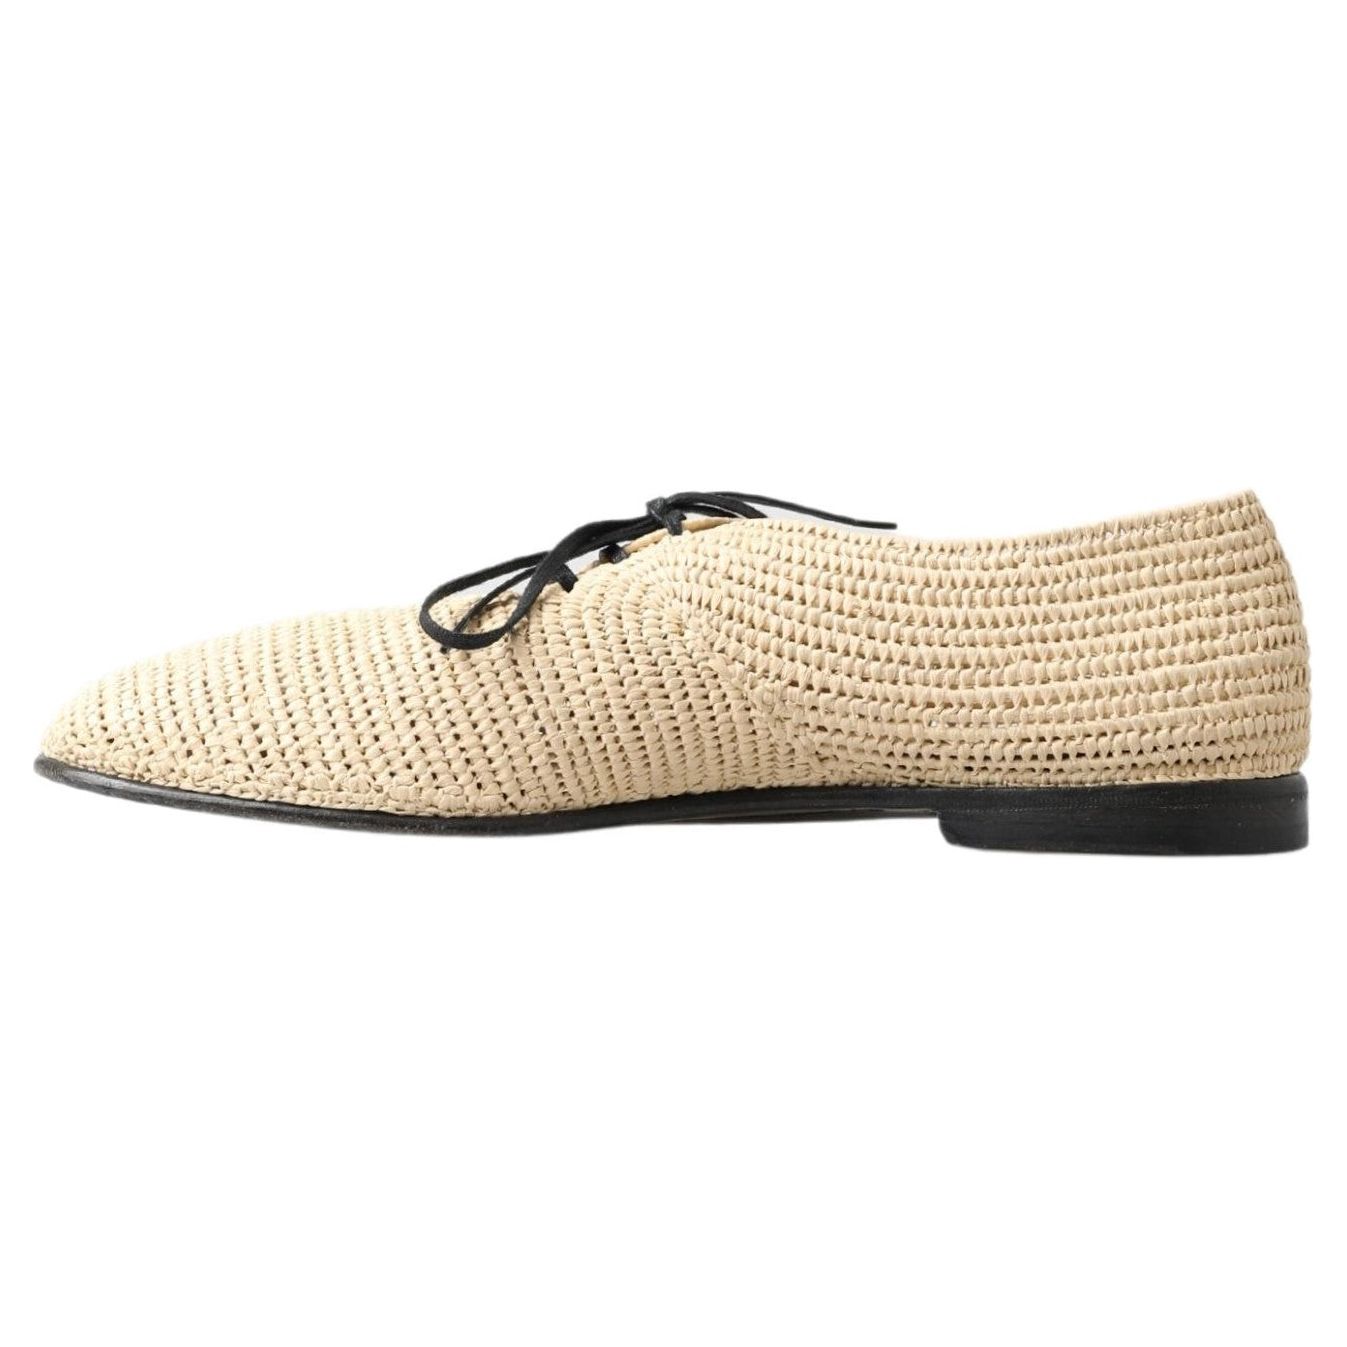 Dolce & Gabbana Chic Beige Derby Lace-Up Casual Men's Shoes beige-woven-lace-up-casual-derby-shoes